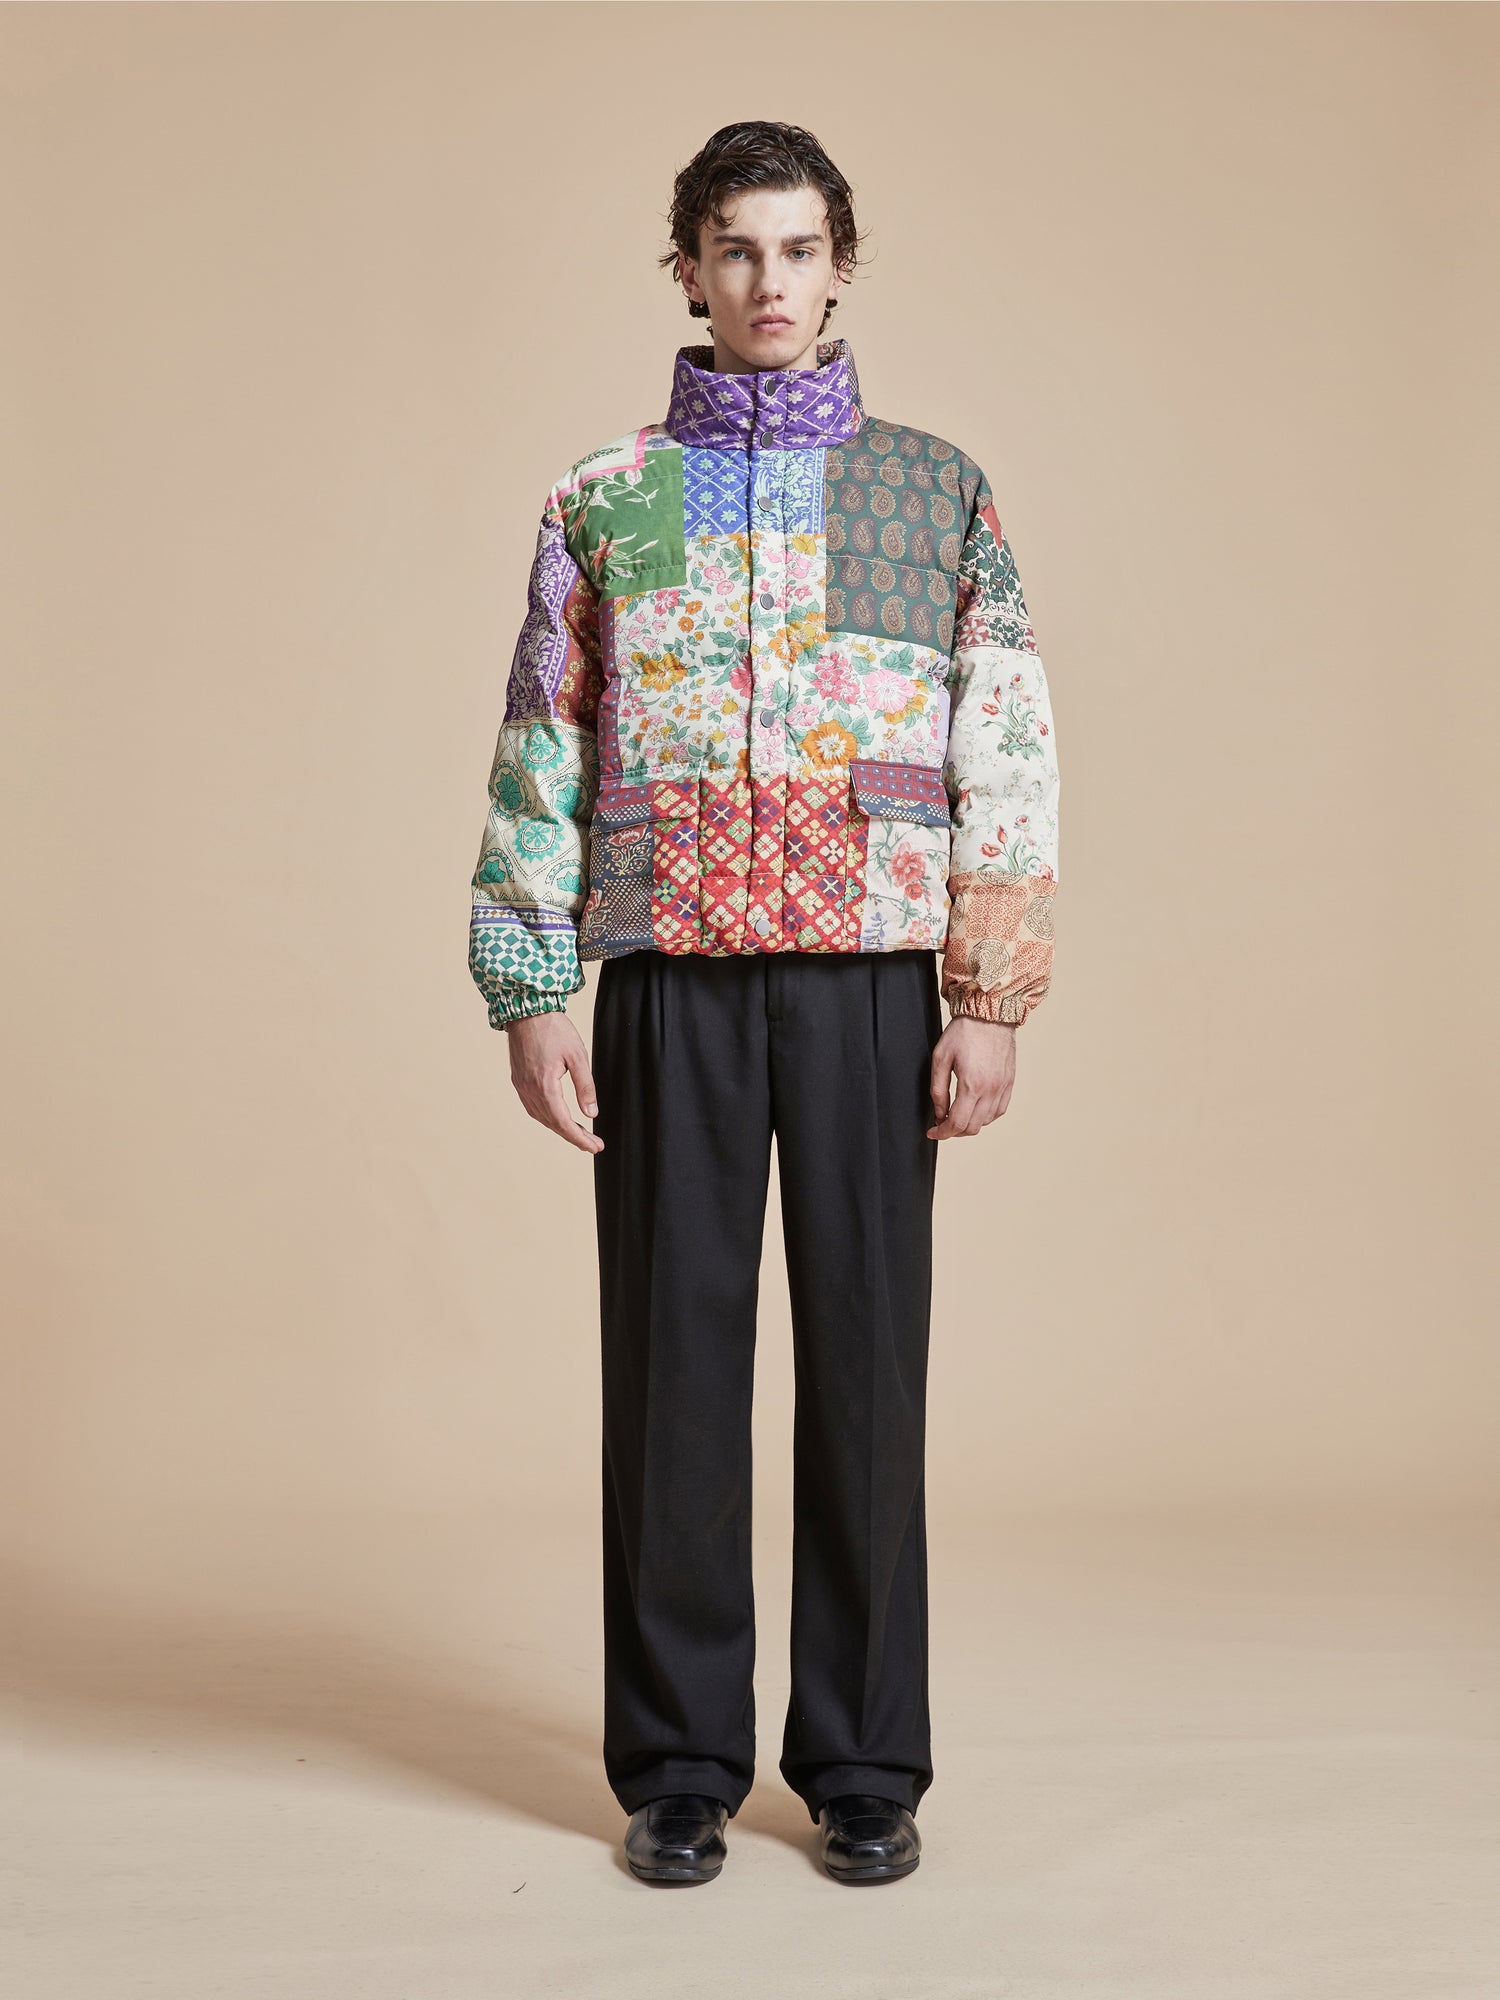 A man wearing a Found Gardenia Tapestry Puffer Jacket adorned with traditional South Asian prints.